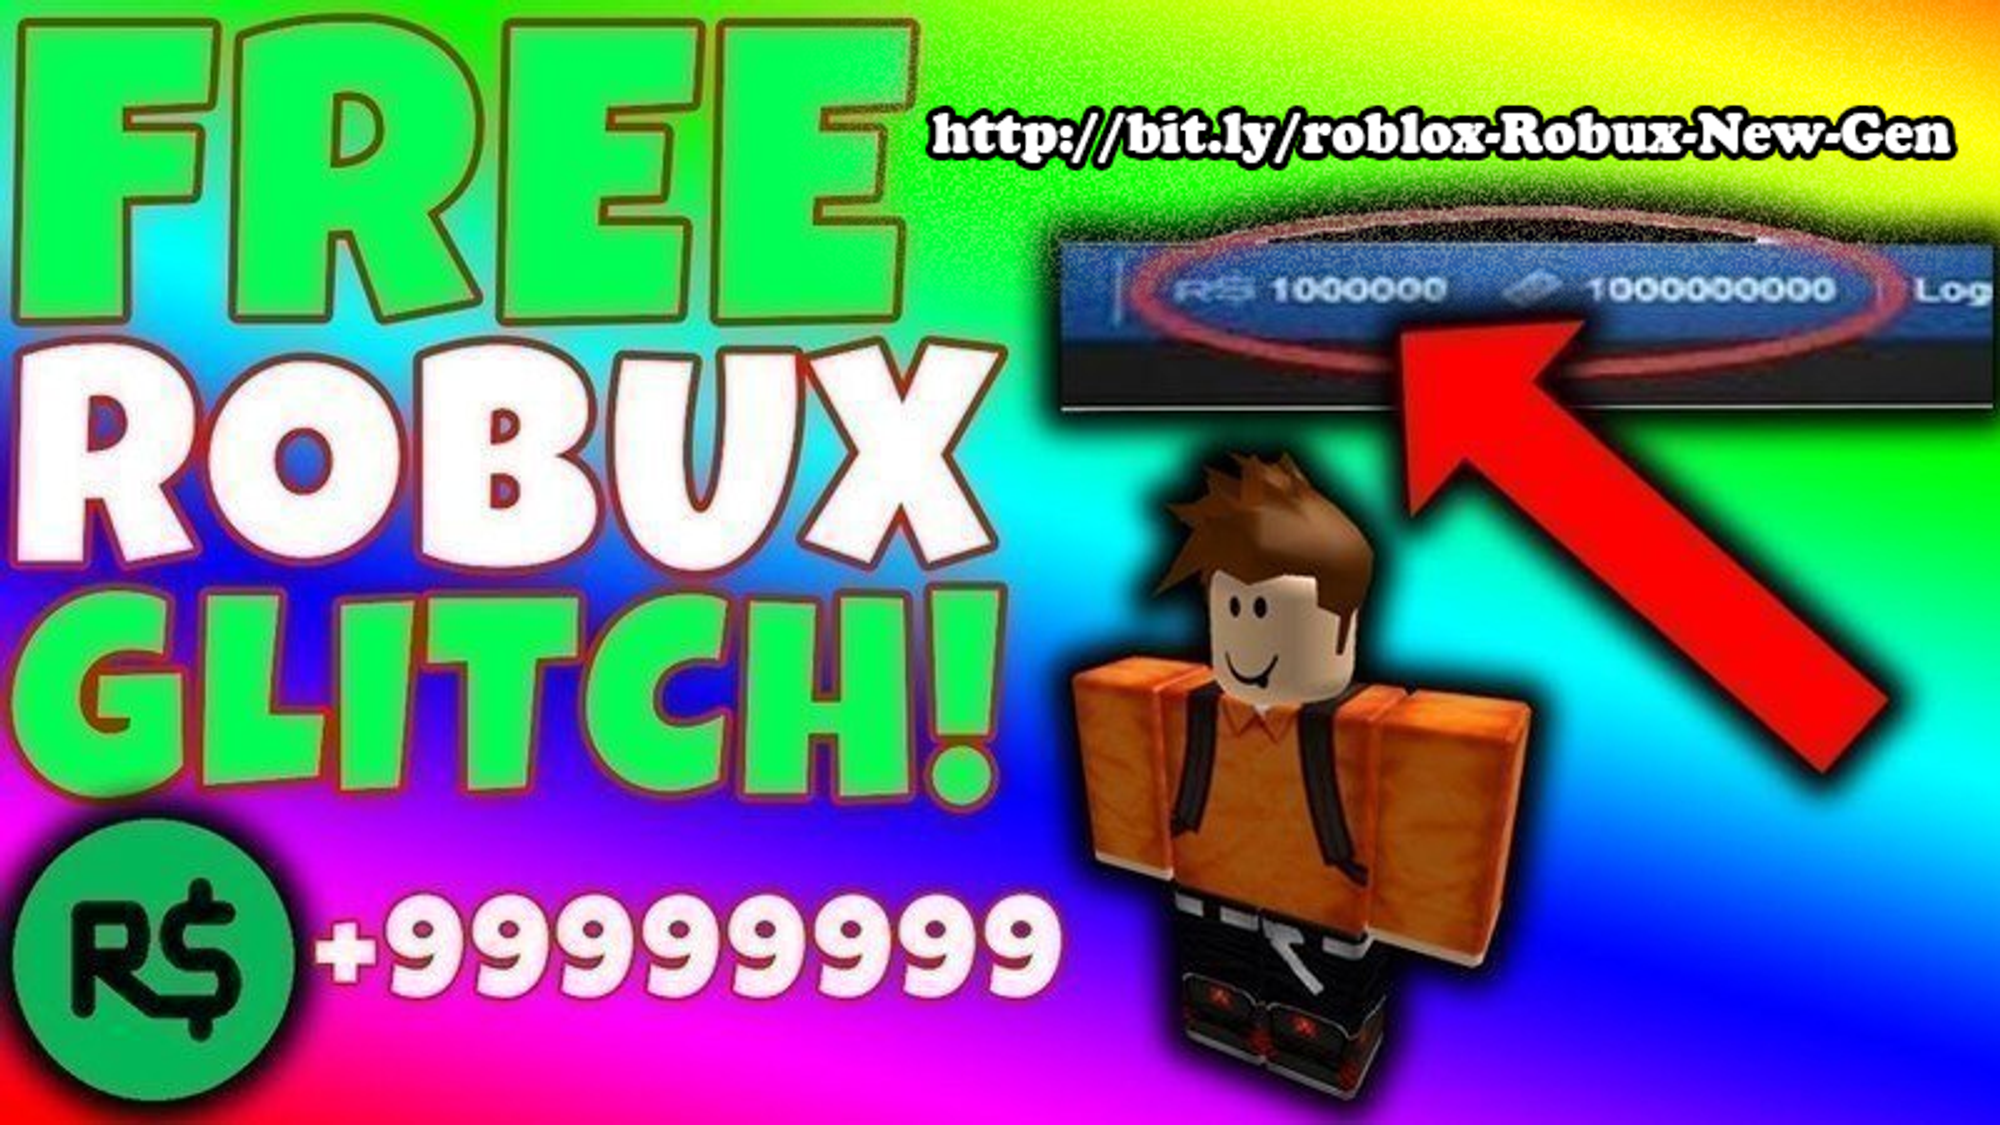 How To Get Free Robux On Roblox Instantly